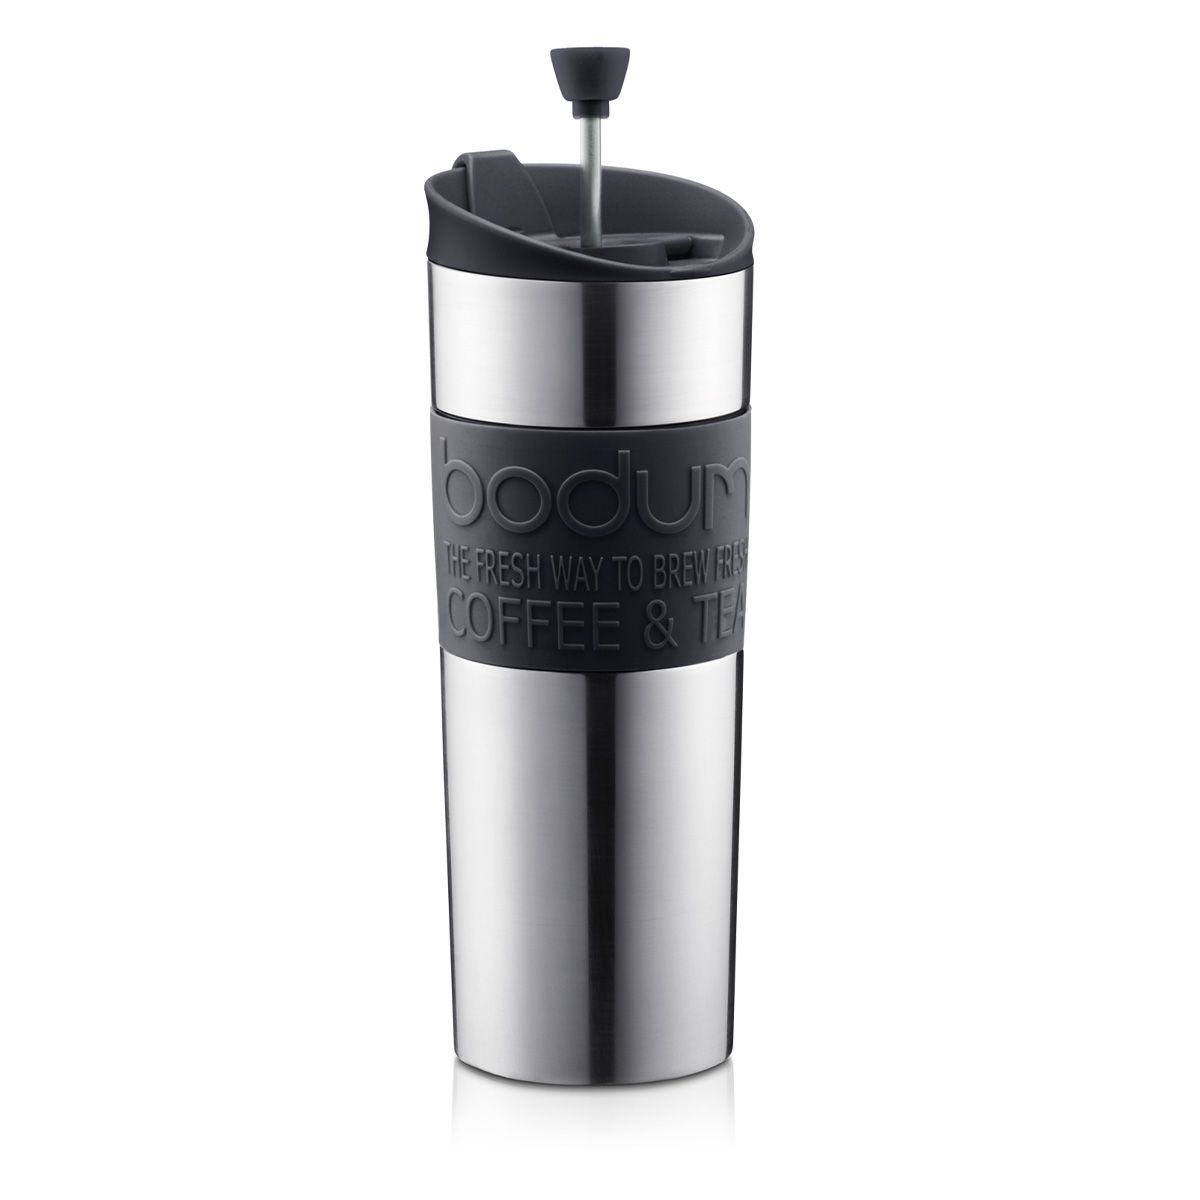 Brewing your coffee in this travel thermos is easier than using a